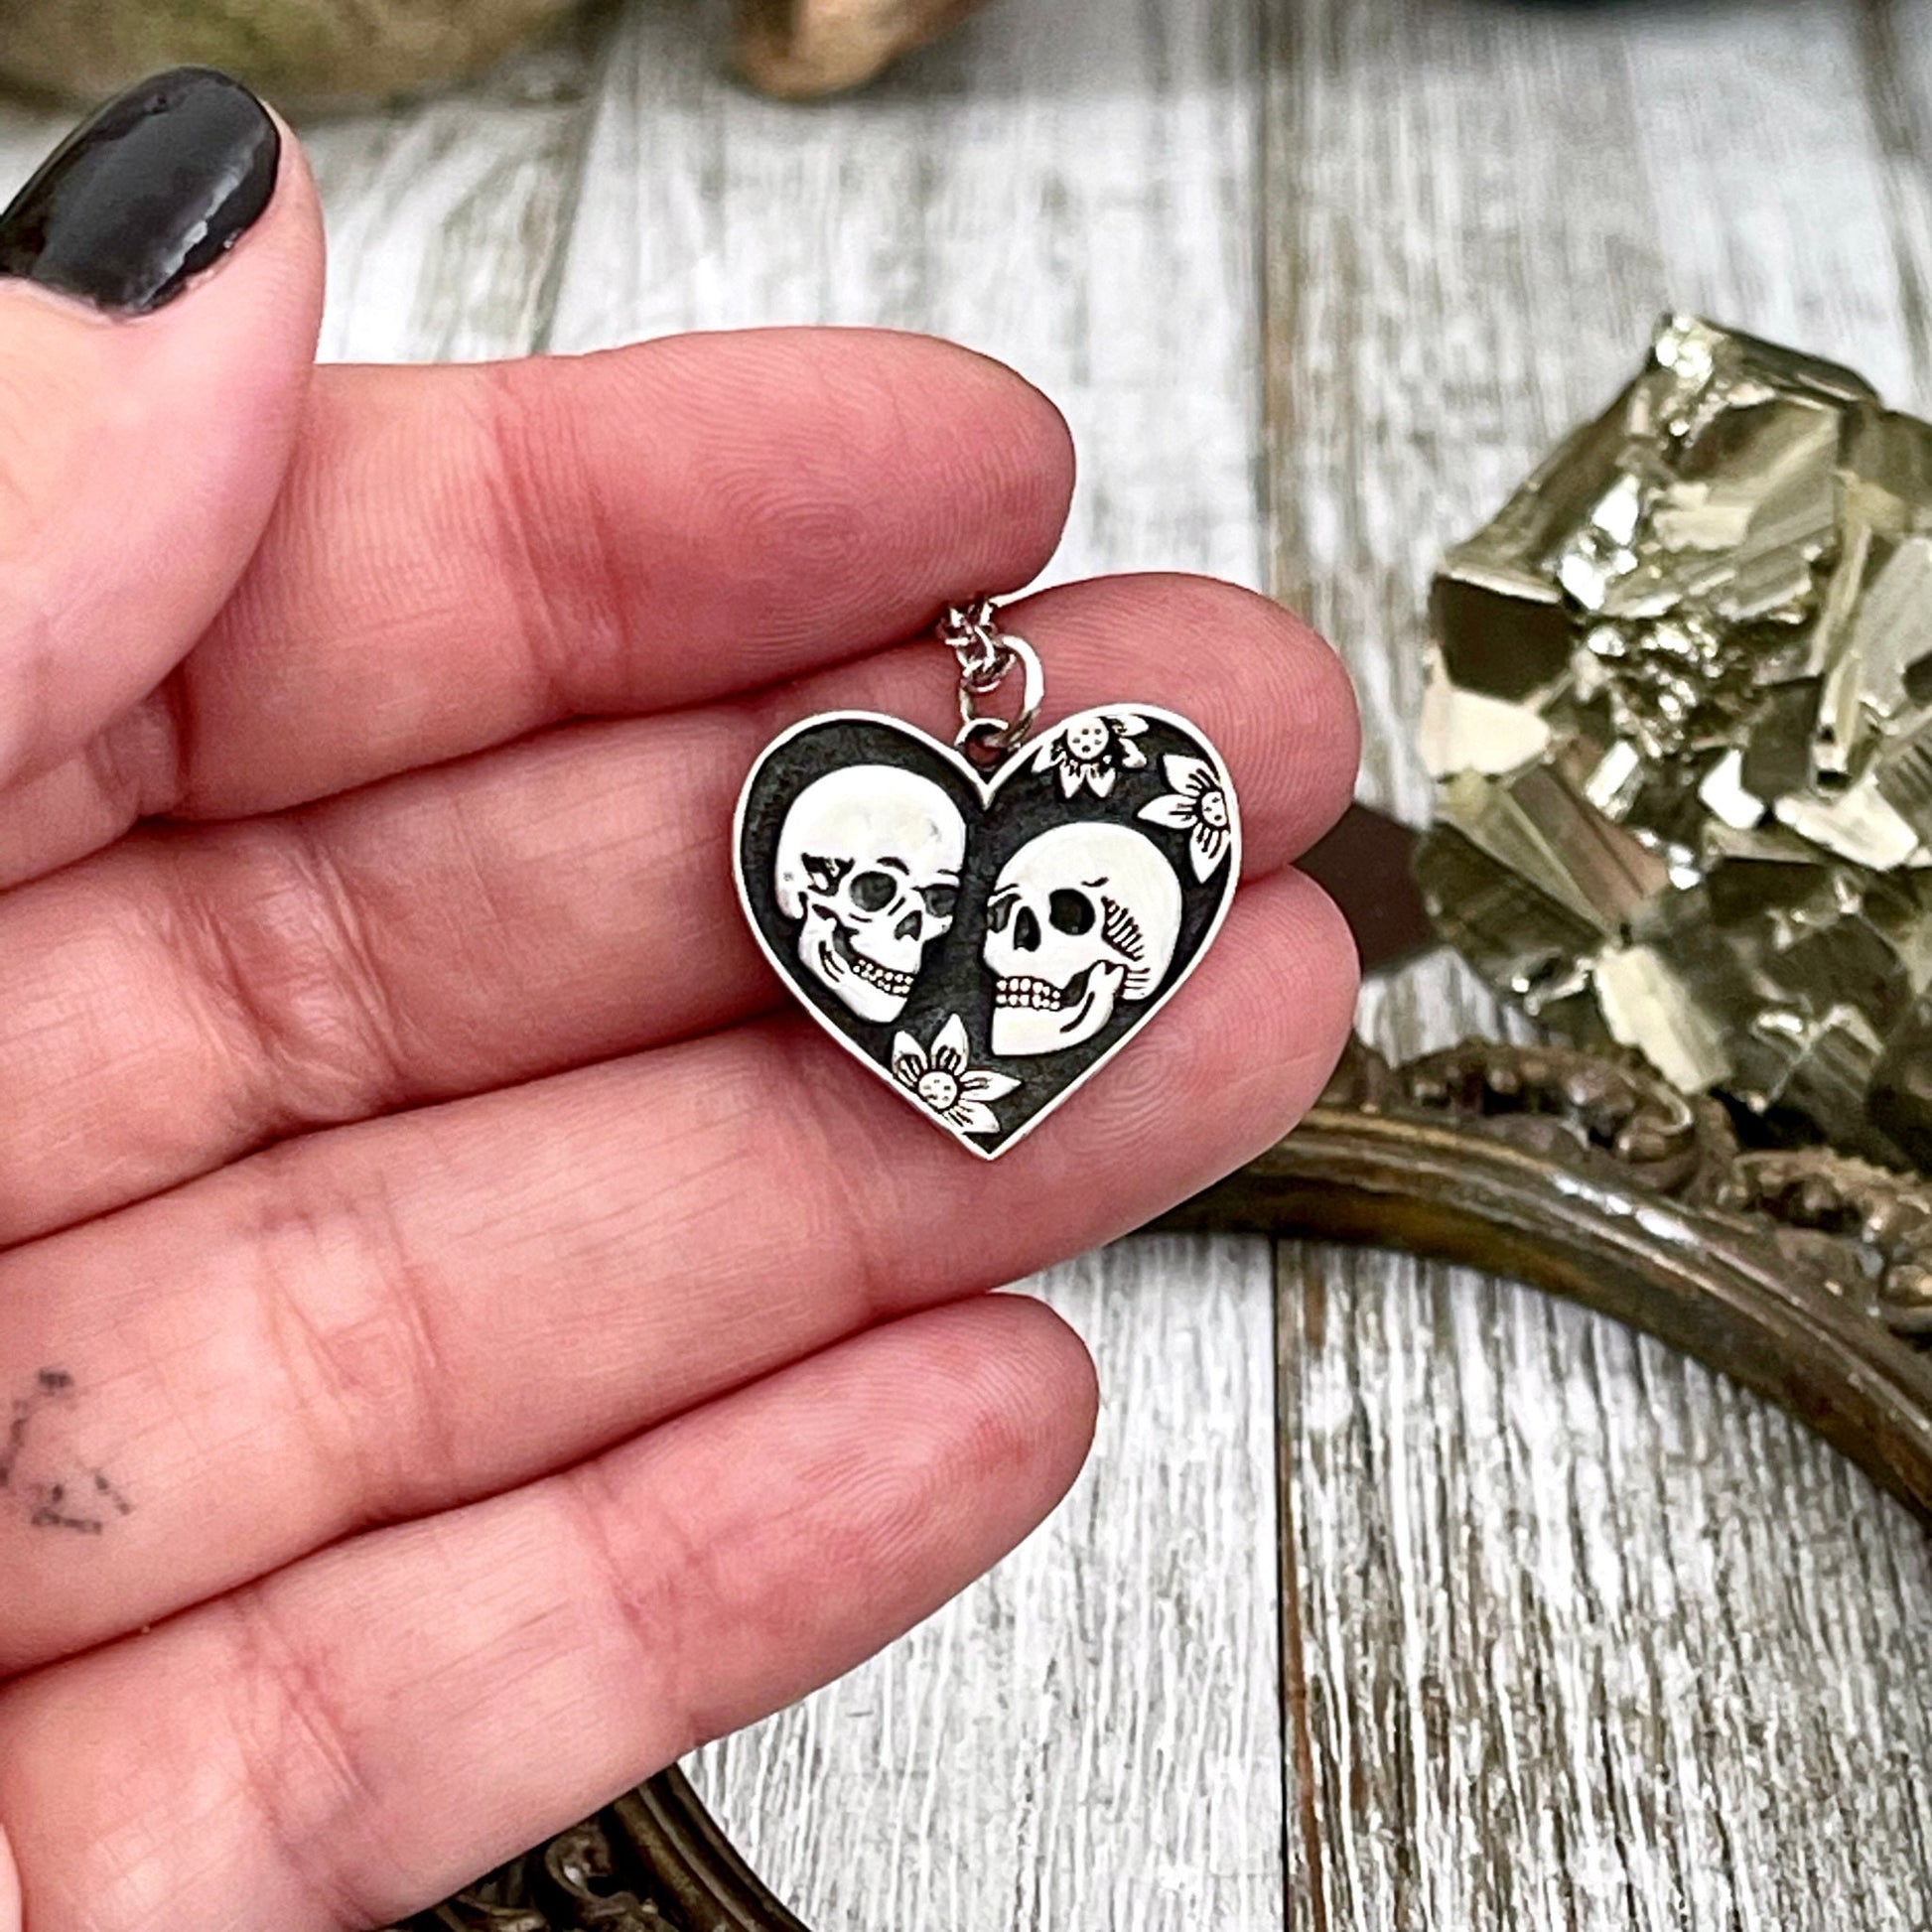 925 Sterling Silver, Etsy ID: 1572730565, Foxlark Alchemy, Gift for Woman, Gothic Jewelry, Jewelry, Necklace Pendant, Necklaces, Pendants, Skull Necklace, Skull Necklace Charm, Talisman Necklace, The Lovers, TINY TALISMANS, Witch Jewelry, Witch necklace,